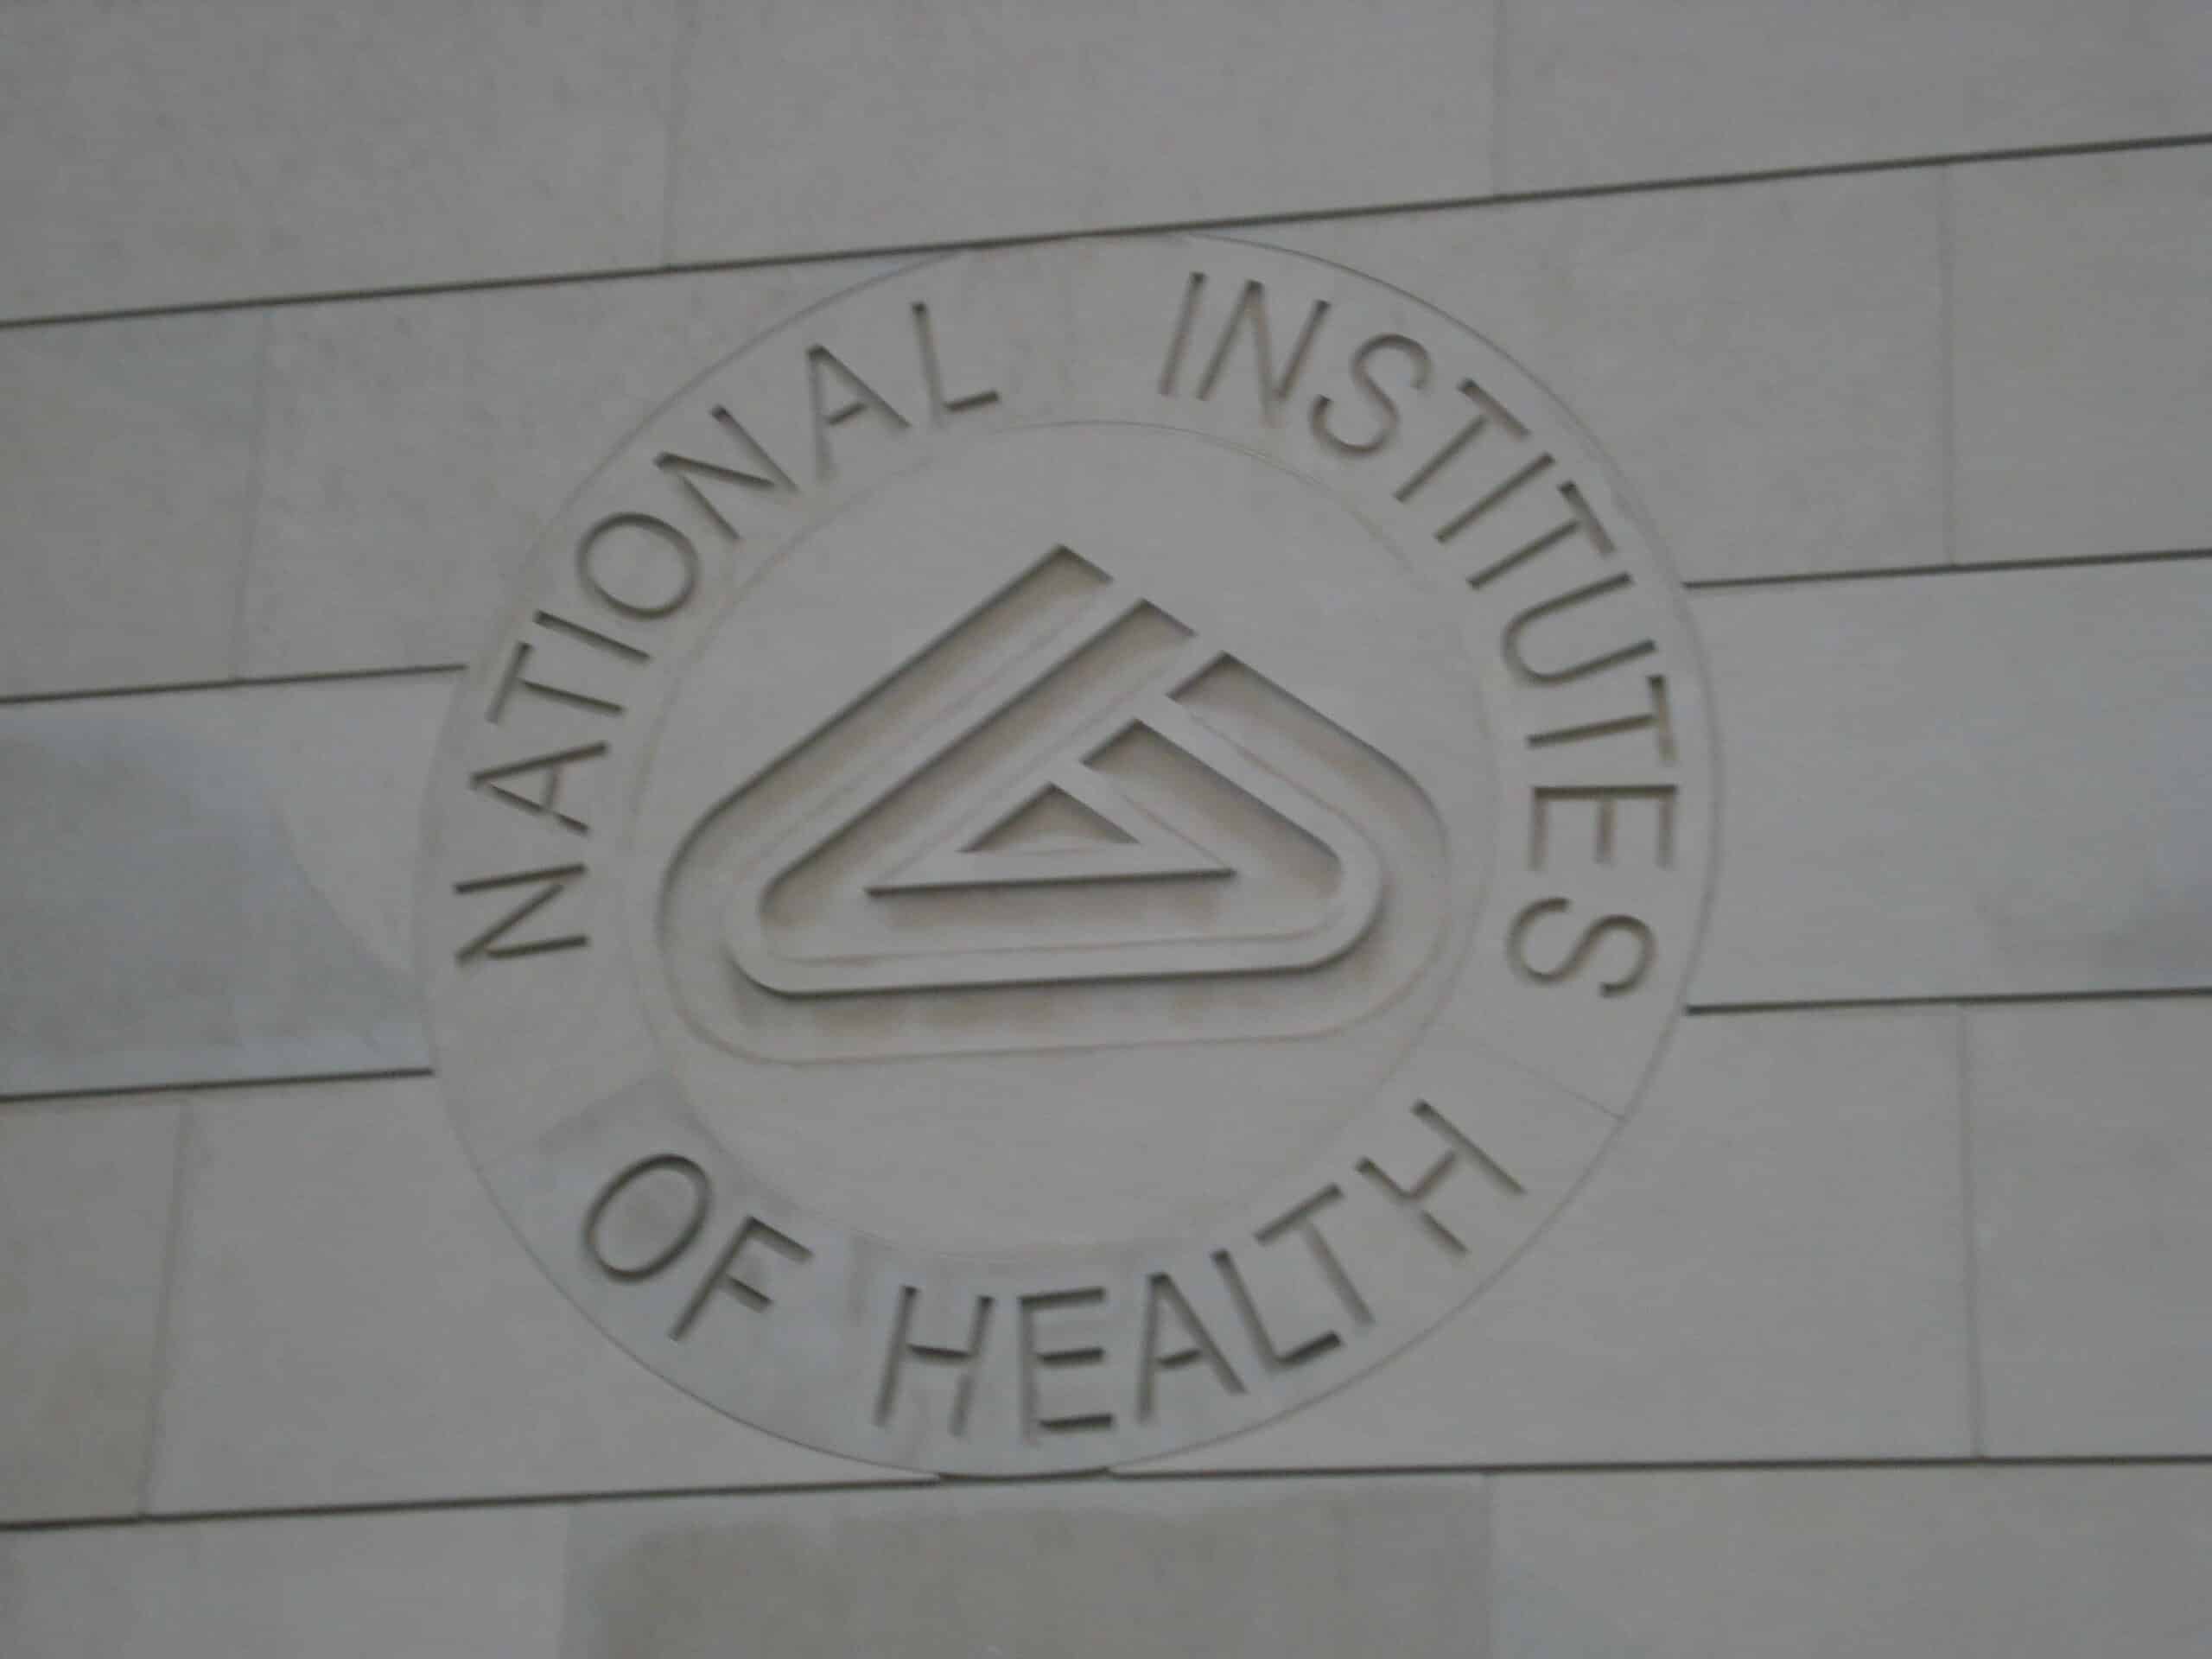 National Institutes of Health building sign